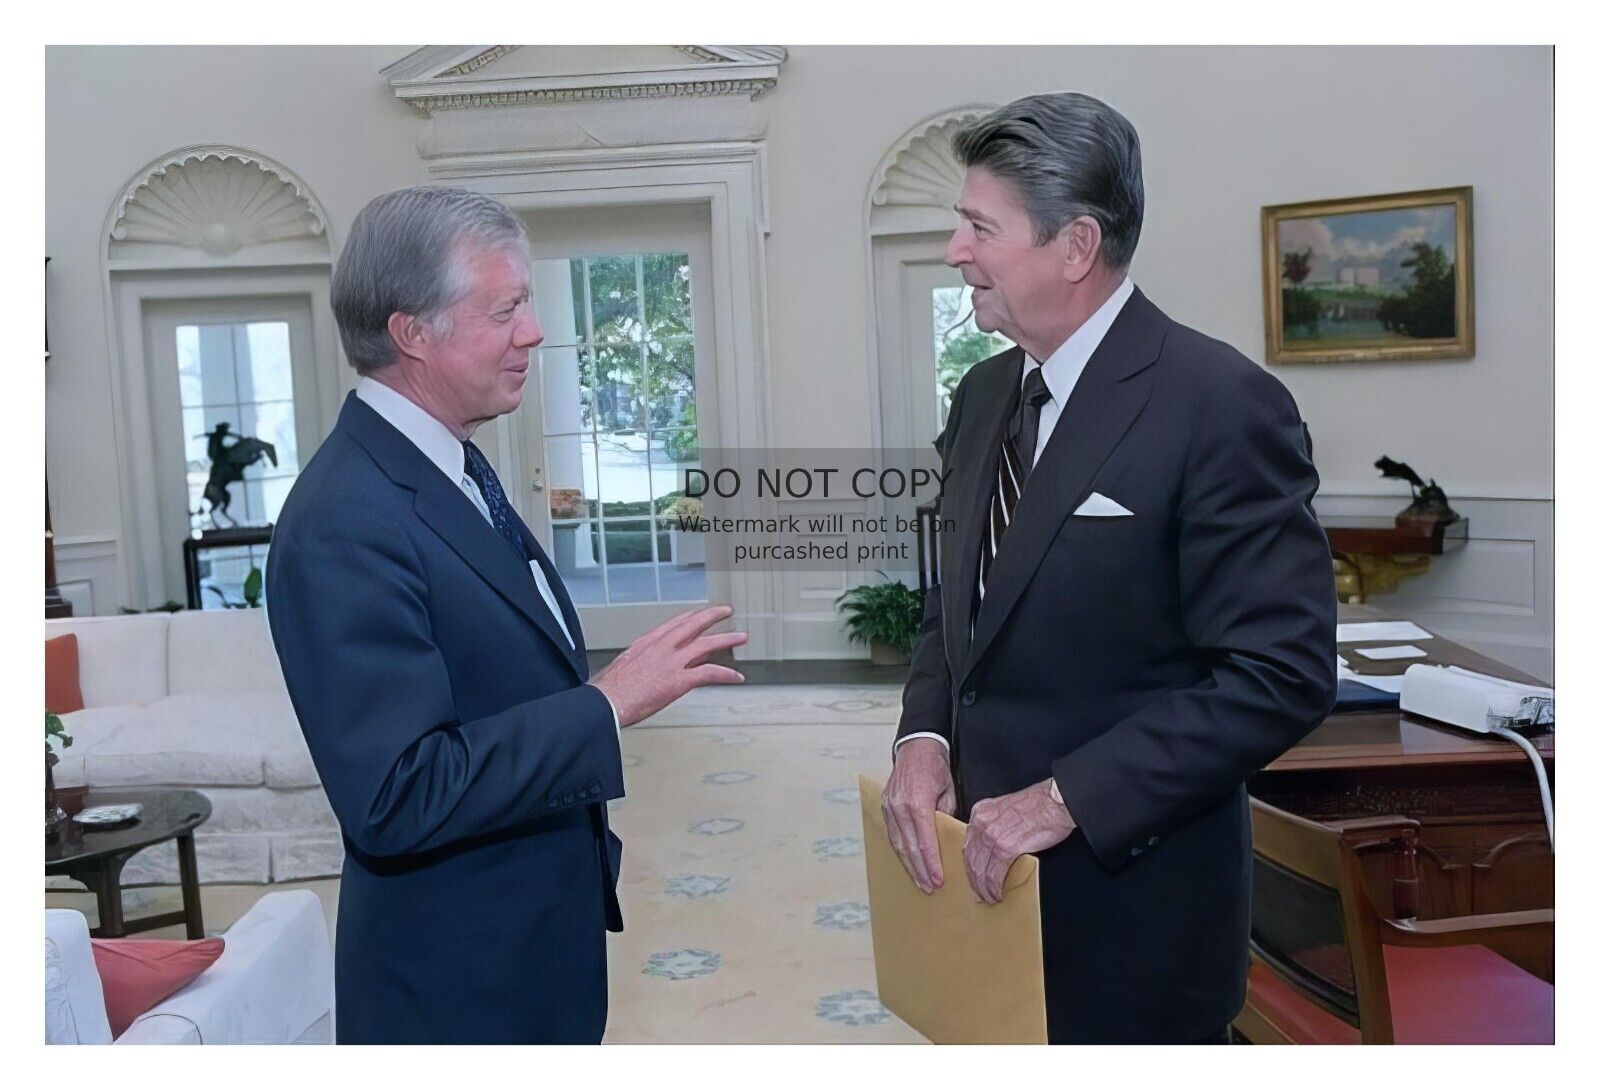 PRESIDENT RONALD REAGAN AND JIMMY CARTER IN THE OVAL OFFICE 1981 4X6 PHOTO